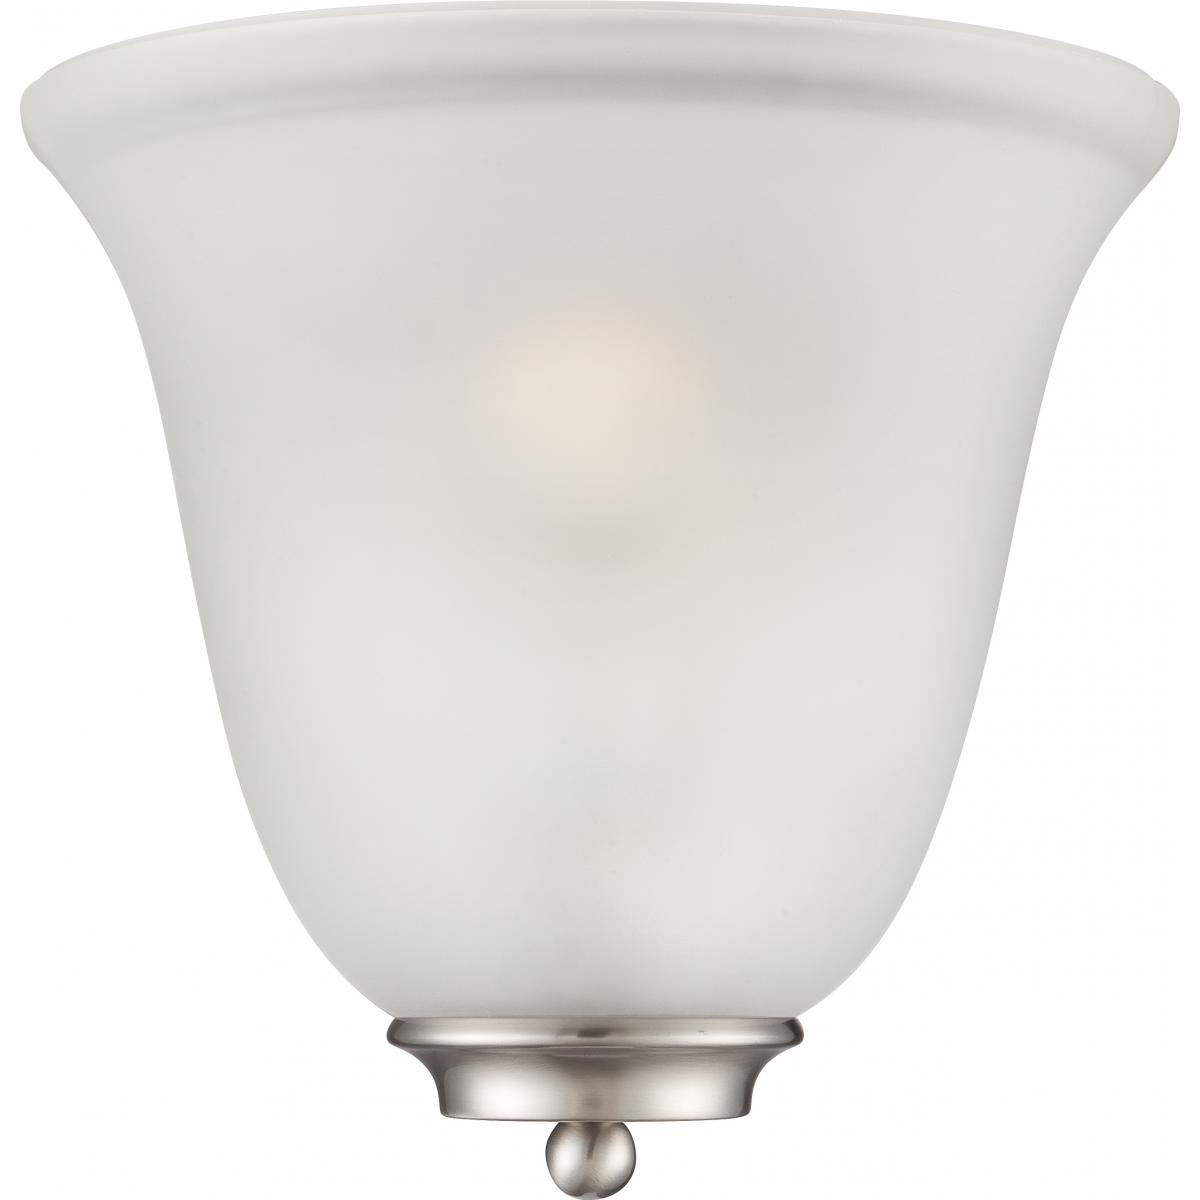 60-5377 EMPIRE 1 LT WALL SCONCE